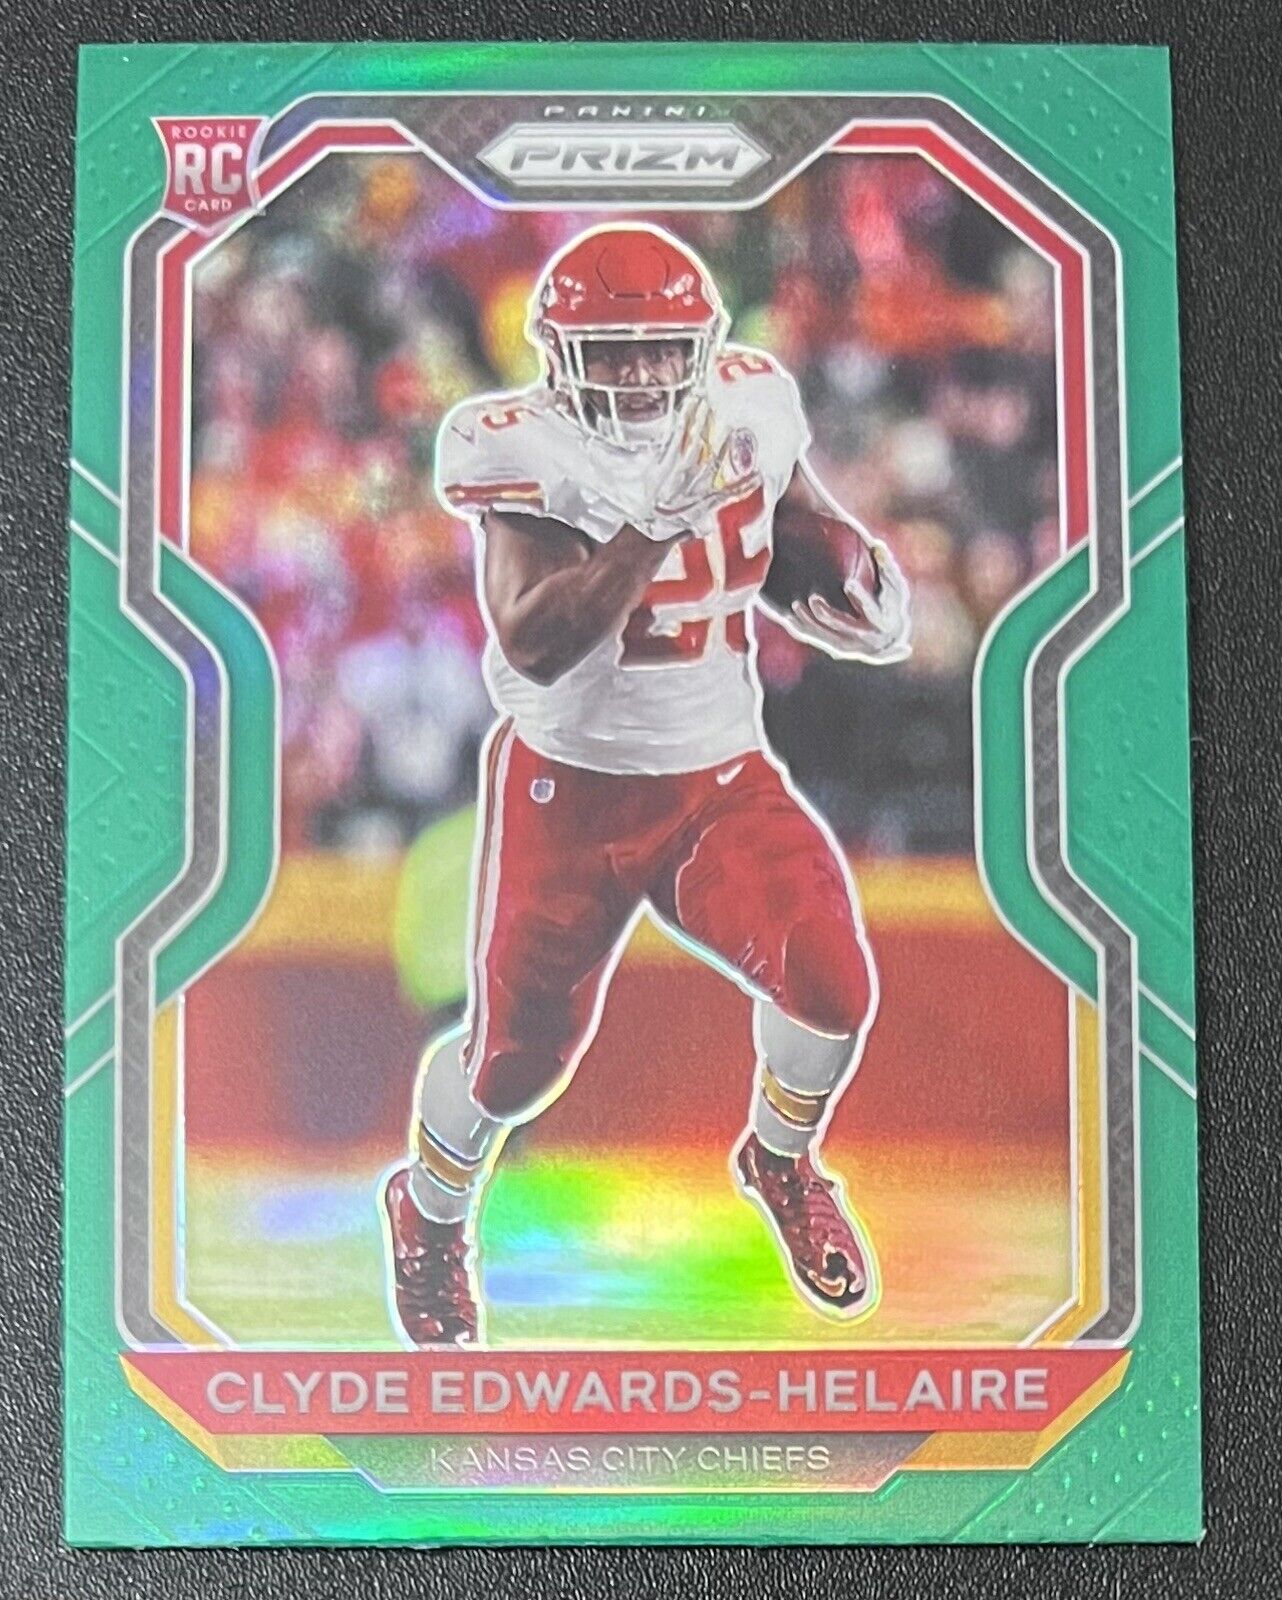 Clyde Edwards-Helaire 2020 Panini Prizm Green ROOKIE #328 - Kansas City Chiefs